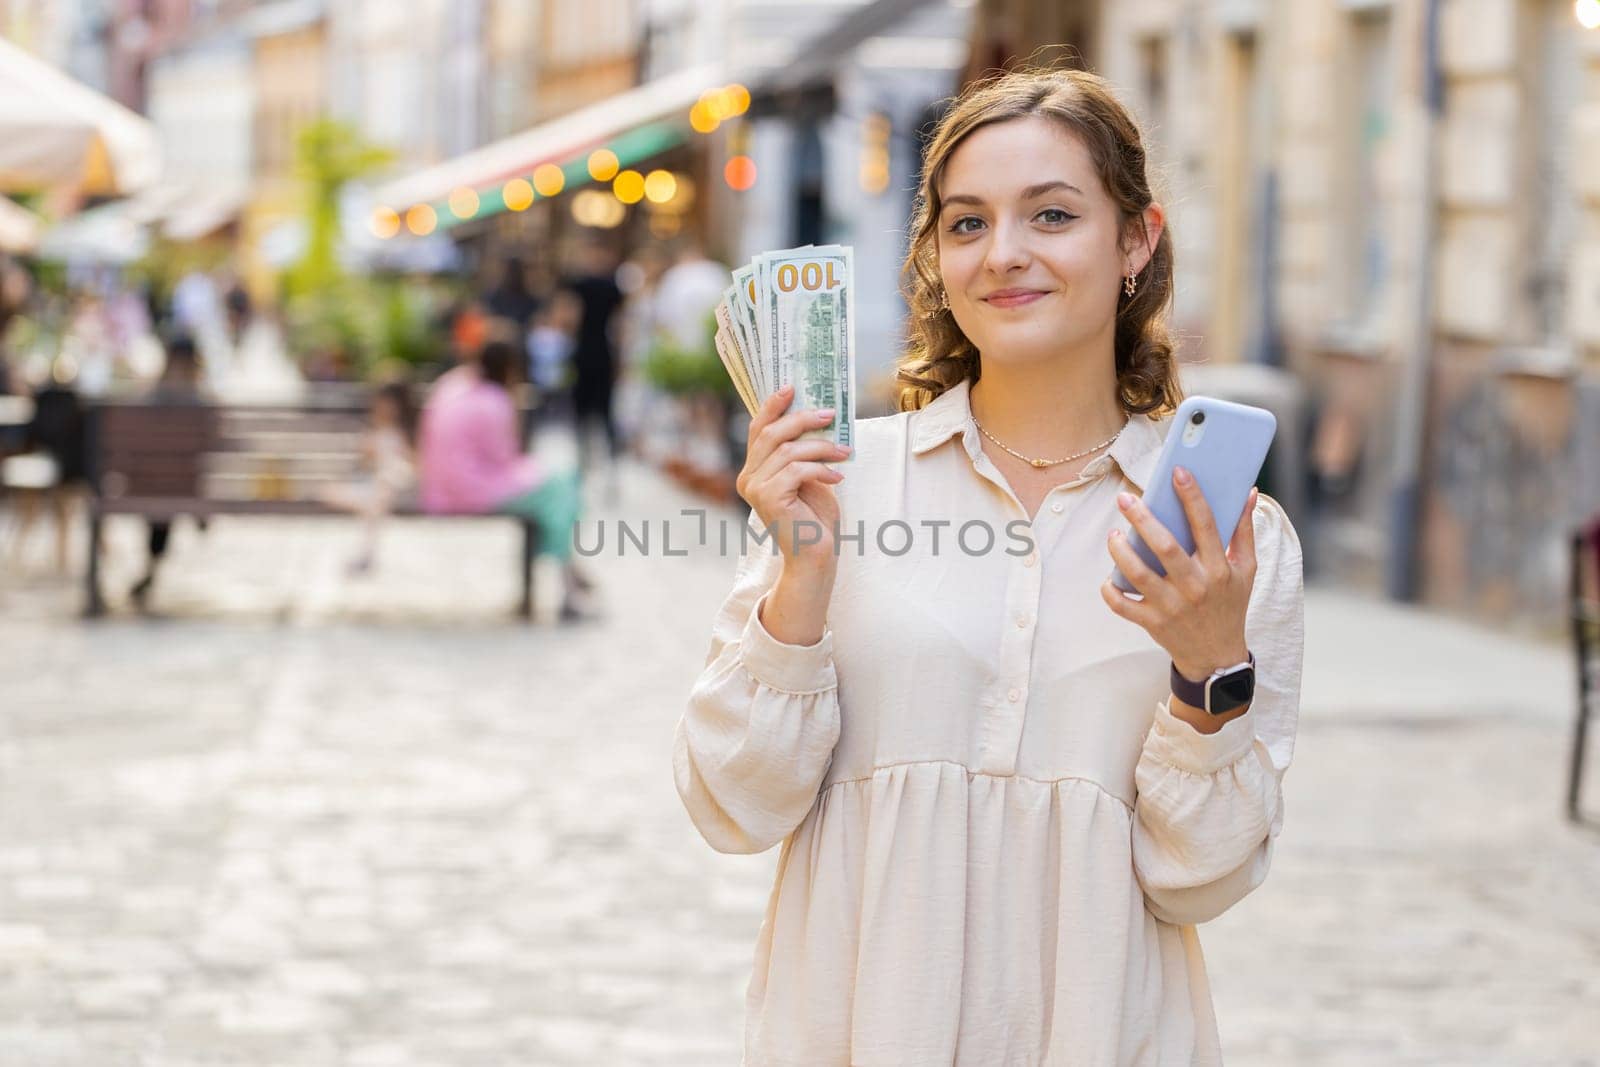 Happy young woman counting money dollar cash, use smartphone calculator app, satisfied of income for planned vacation gifts. Lovely girl walking in urban city sunny street. Town lifestyles outdoors